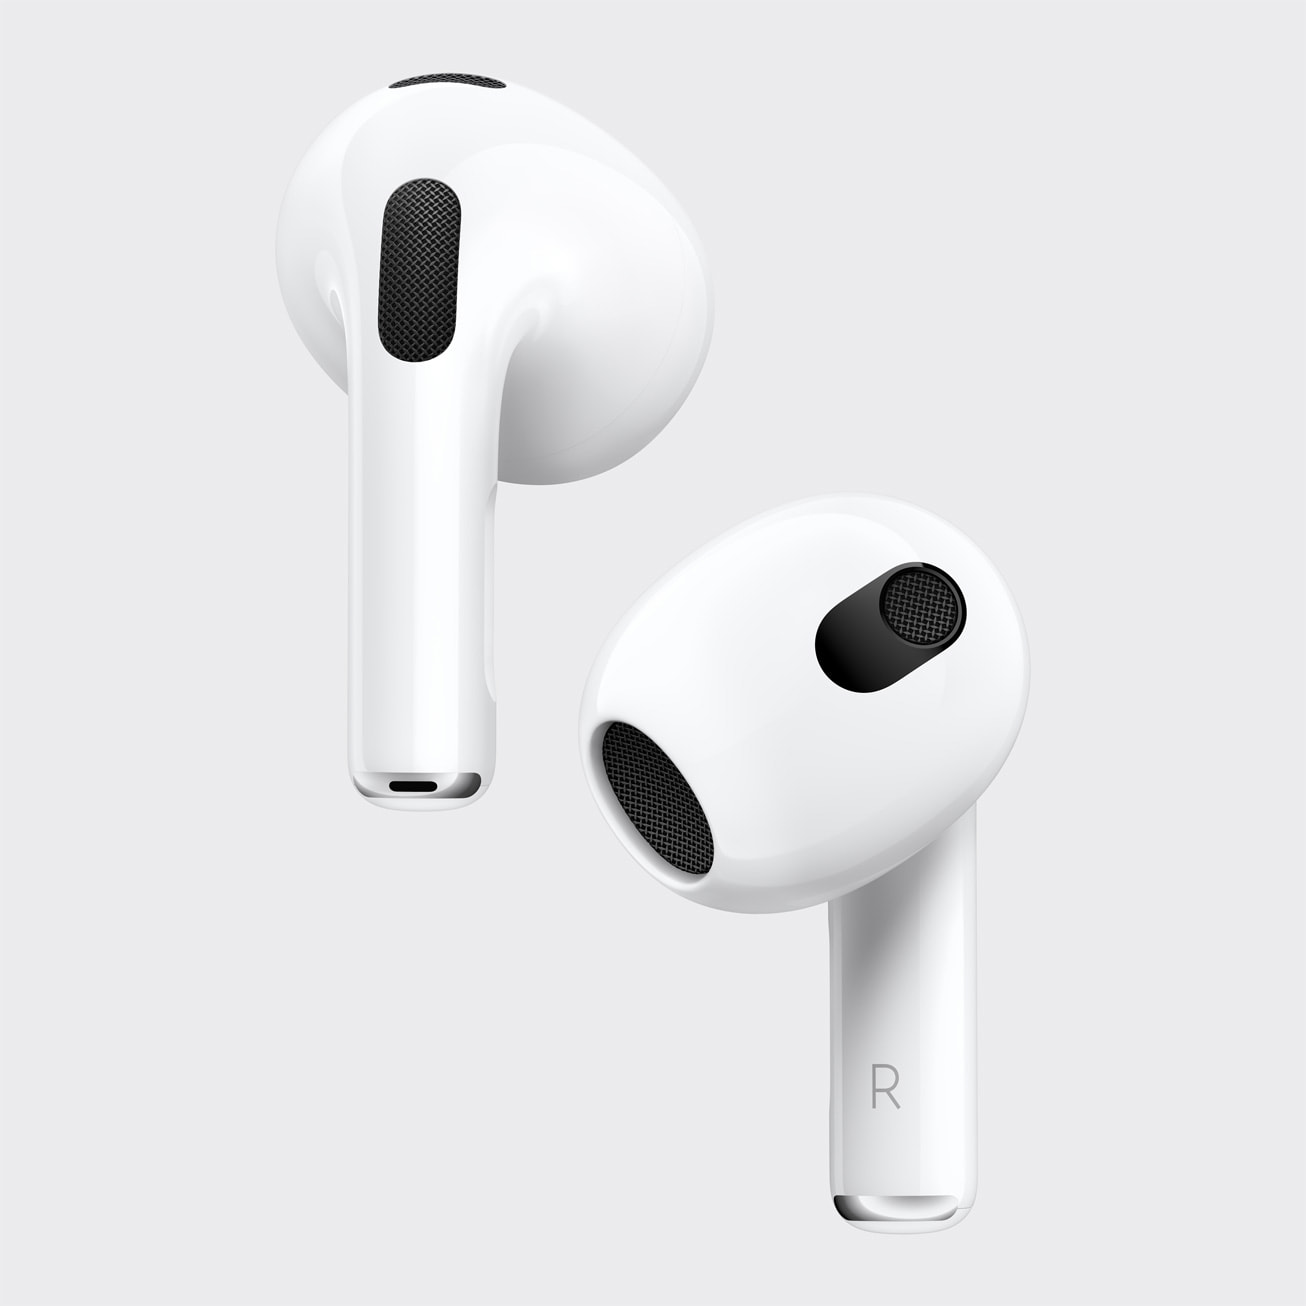 The AirPods are the world's most popular wireless buds